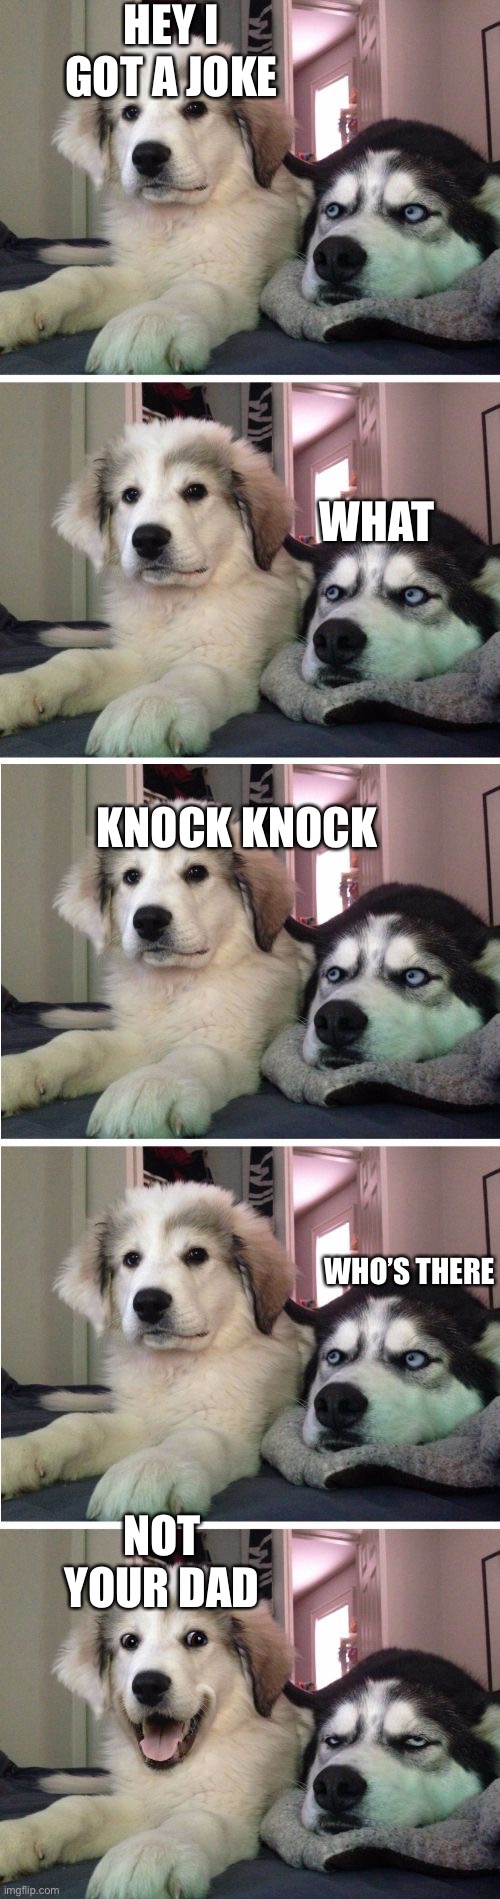 Knock Knock Dogs | HEY I GOT A JOKE; WHAT; KNOCK KNOCK; WHO’S THERE; NOT YOUR DAD | image tagged in knock knock dogs | made w/ Imgflip meme maker